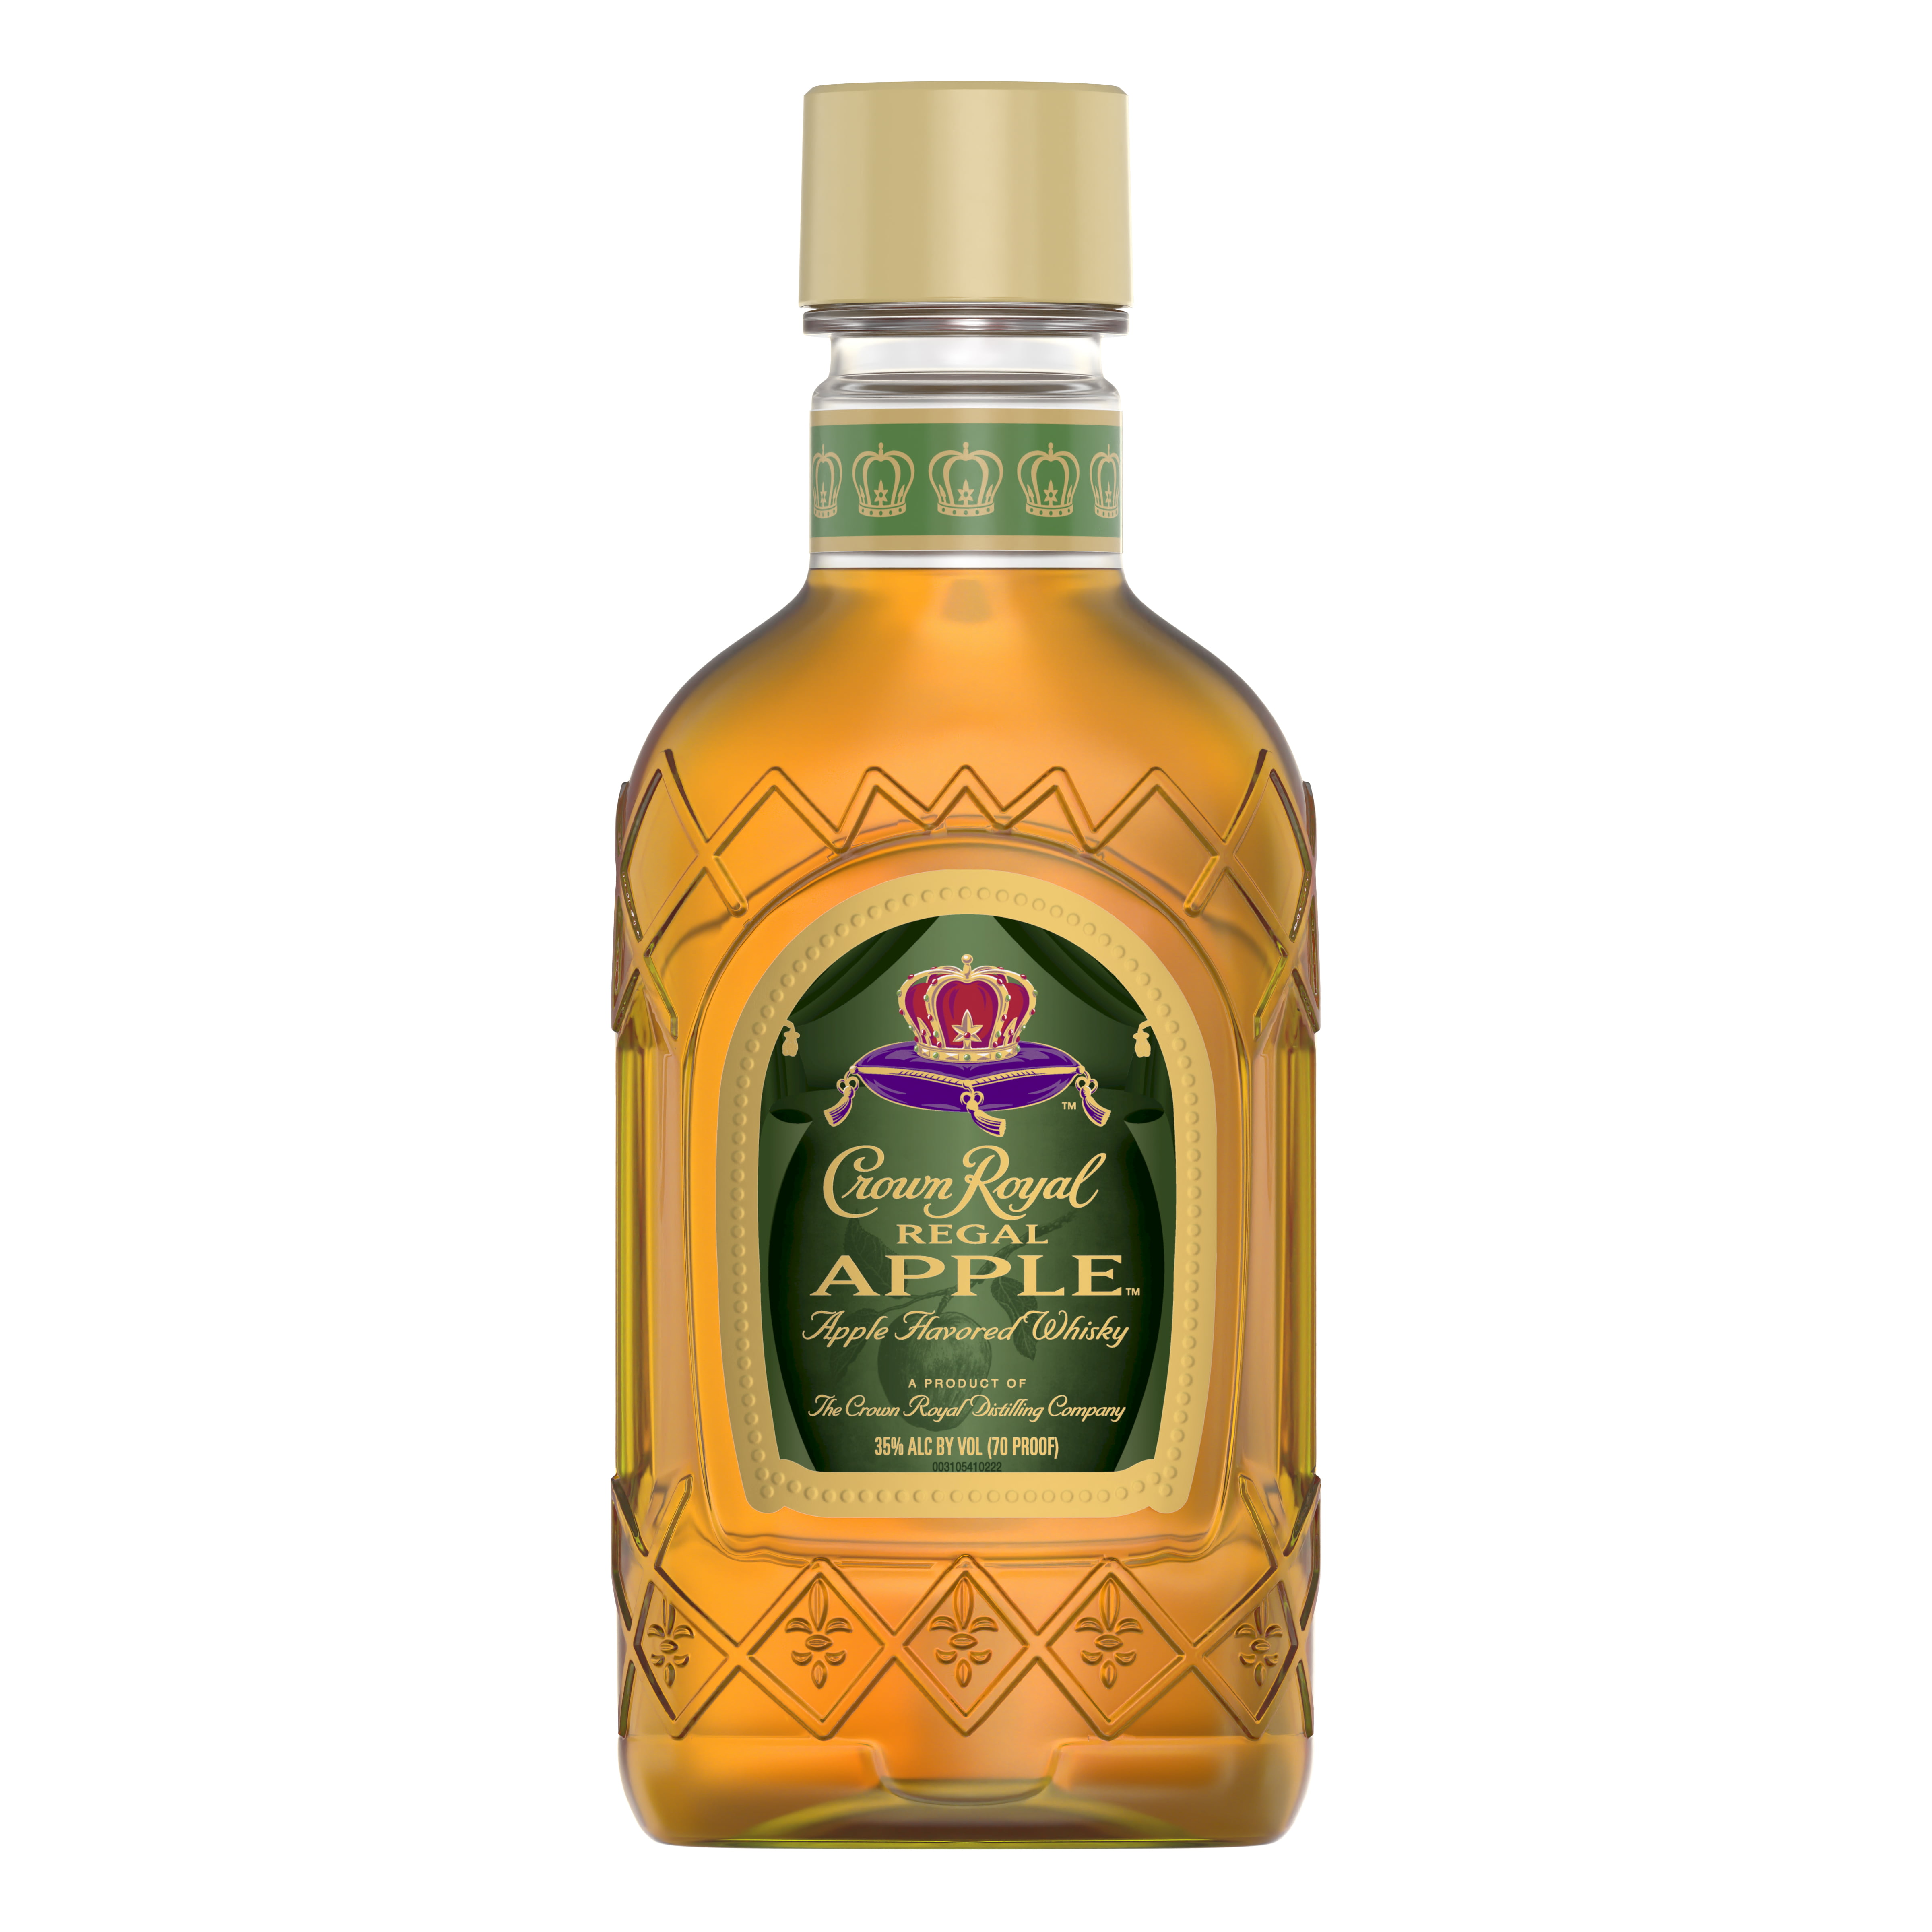 Download Crown Royal Regal Apple Flavored Whisky, 200 mL (70 Proof ...